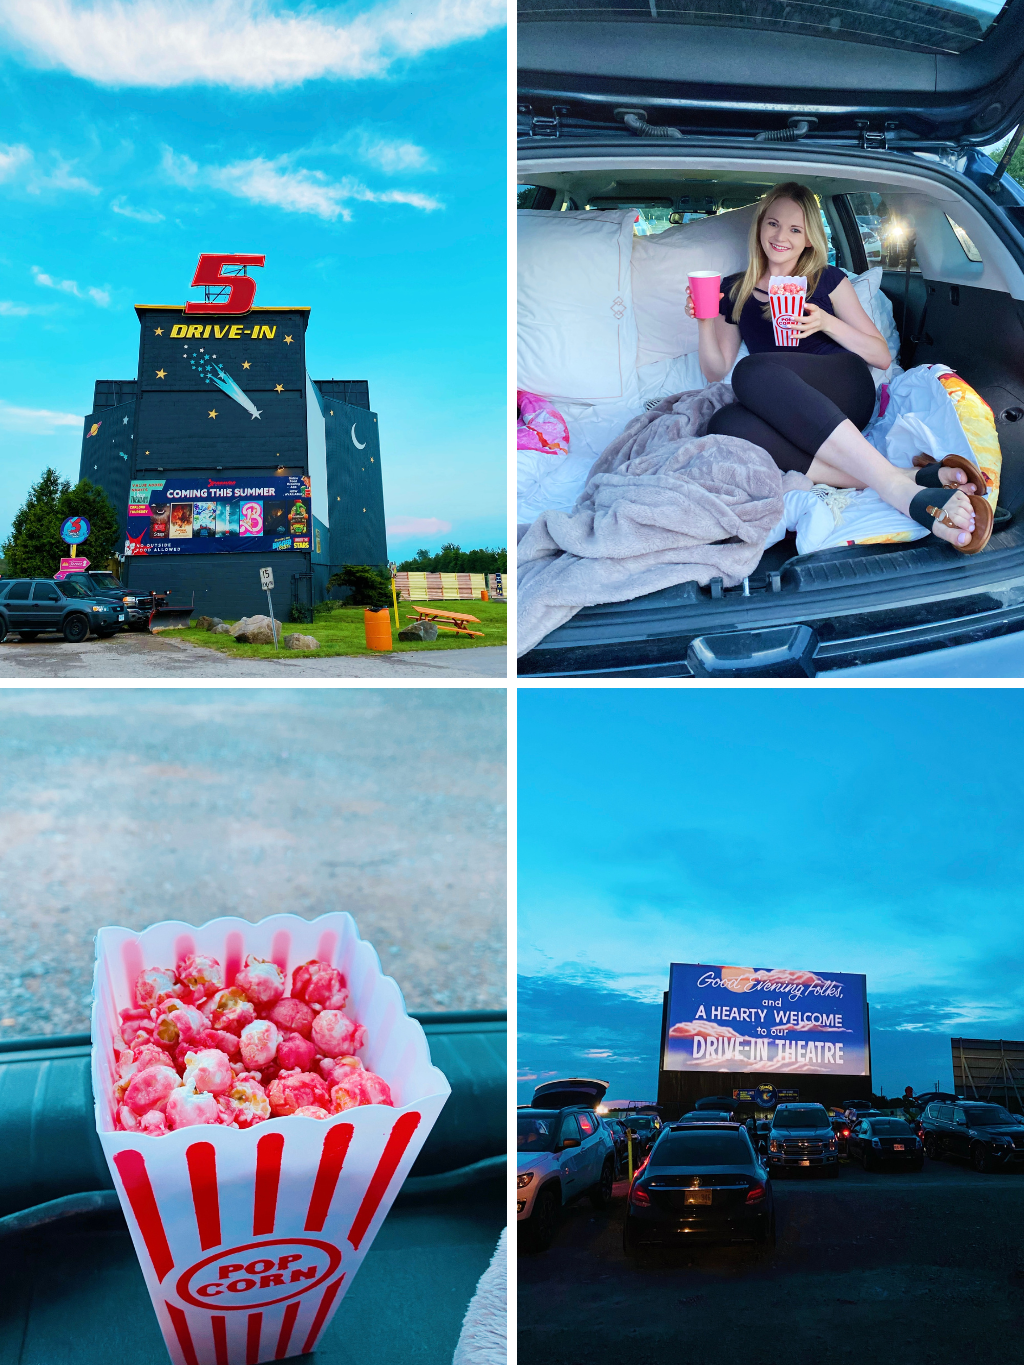 The 5 Drive-In